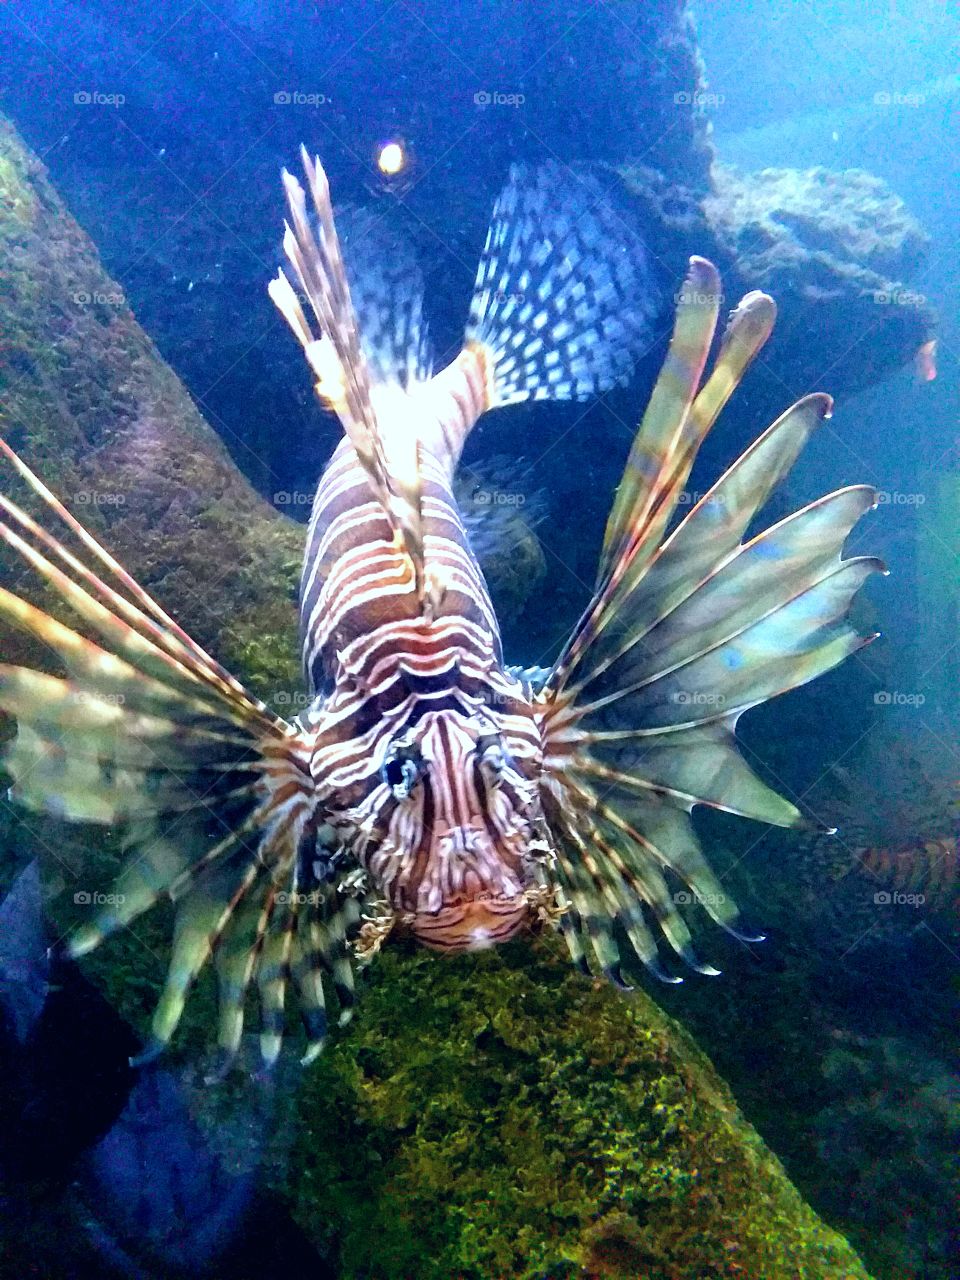 Lionfish! His stripes are gorgeous.